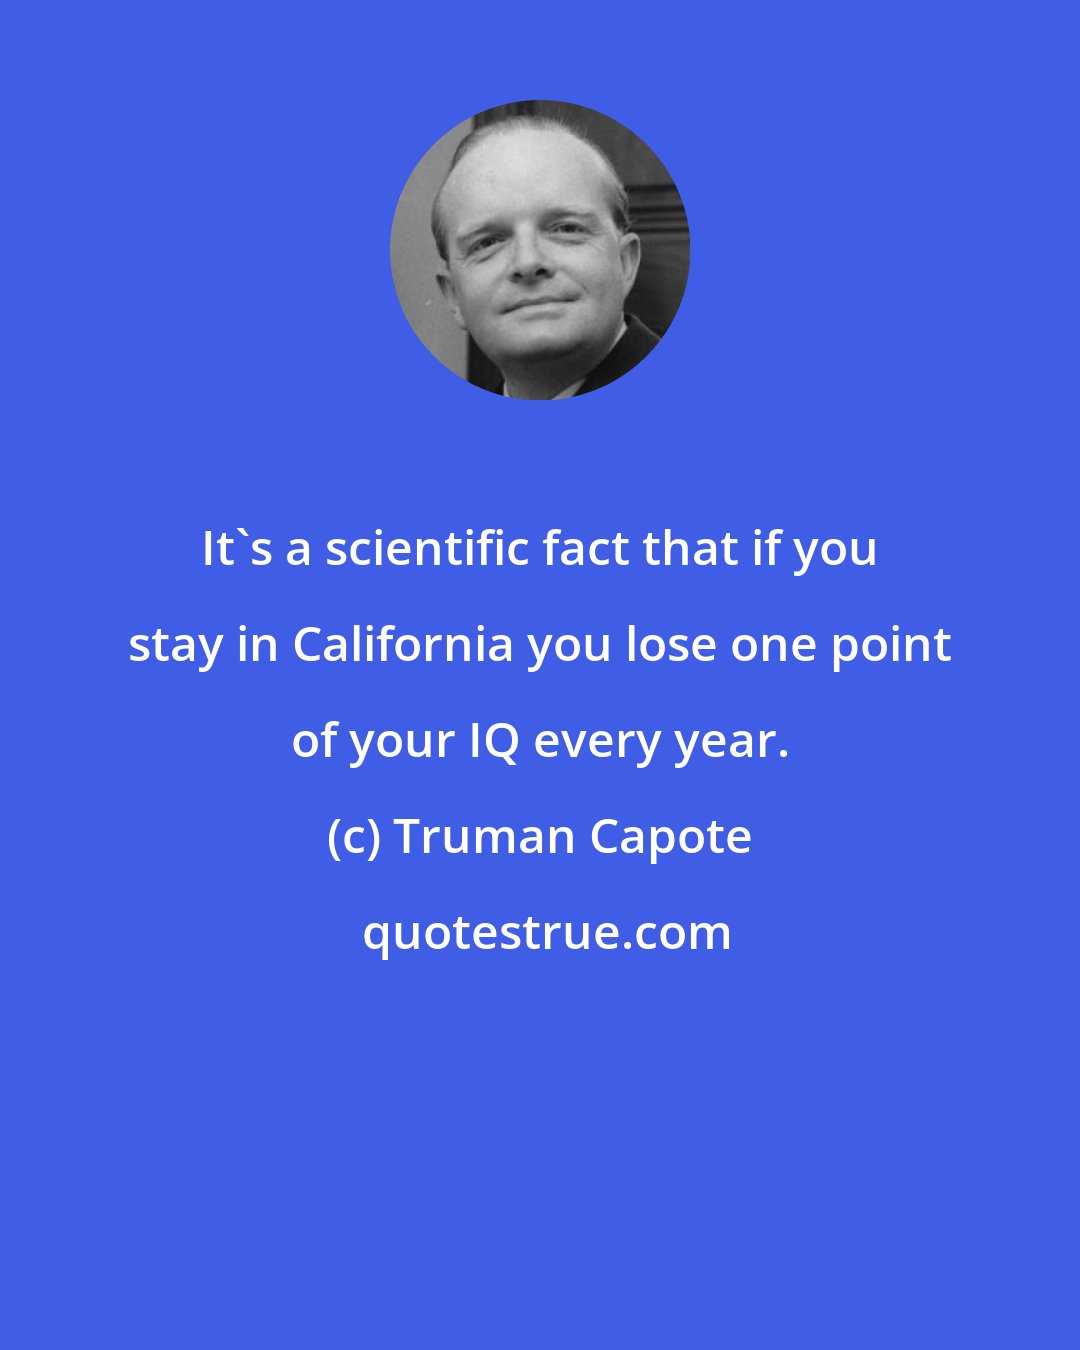 Truman Capote: It's a scientific fact that if you stay in California you lose one point of your IQ every year.